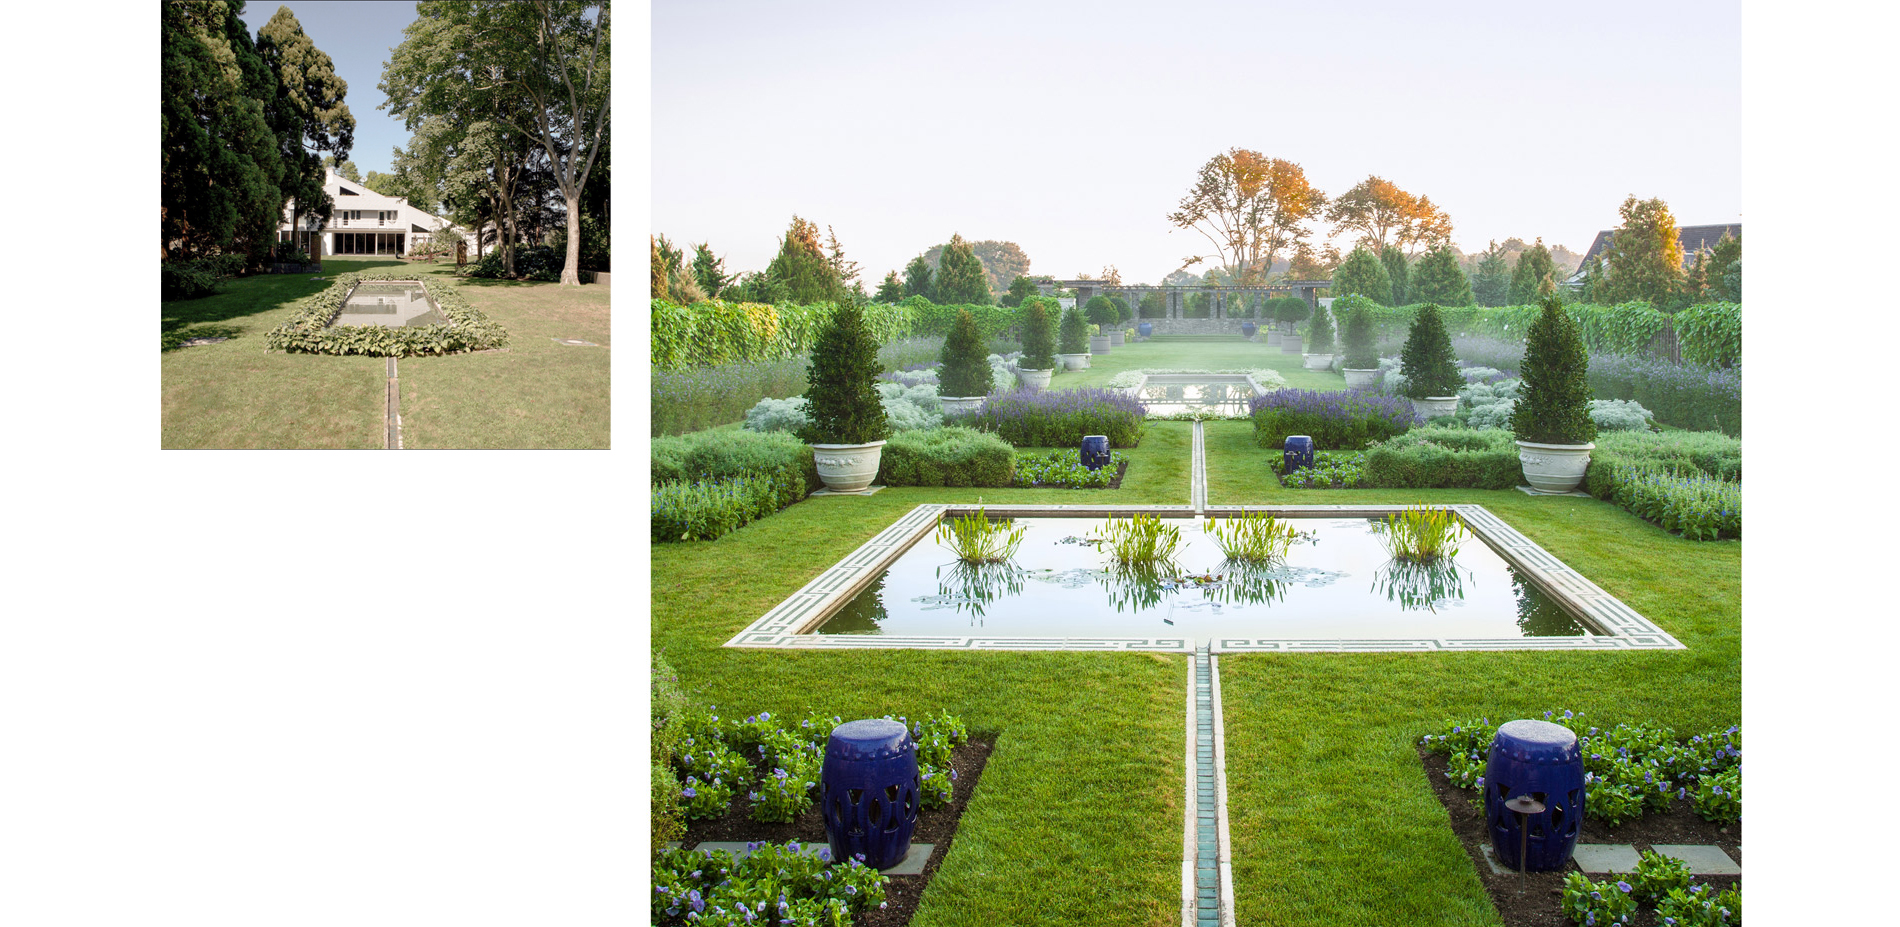 (Left) Remnants of the garden’s features existed in the back yard of the 1980s house, which was constructed over the garden’s west apse. (Right) With …